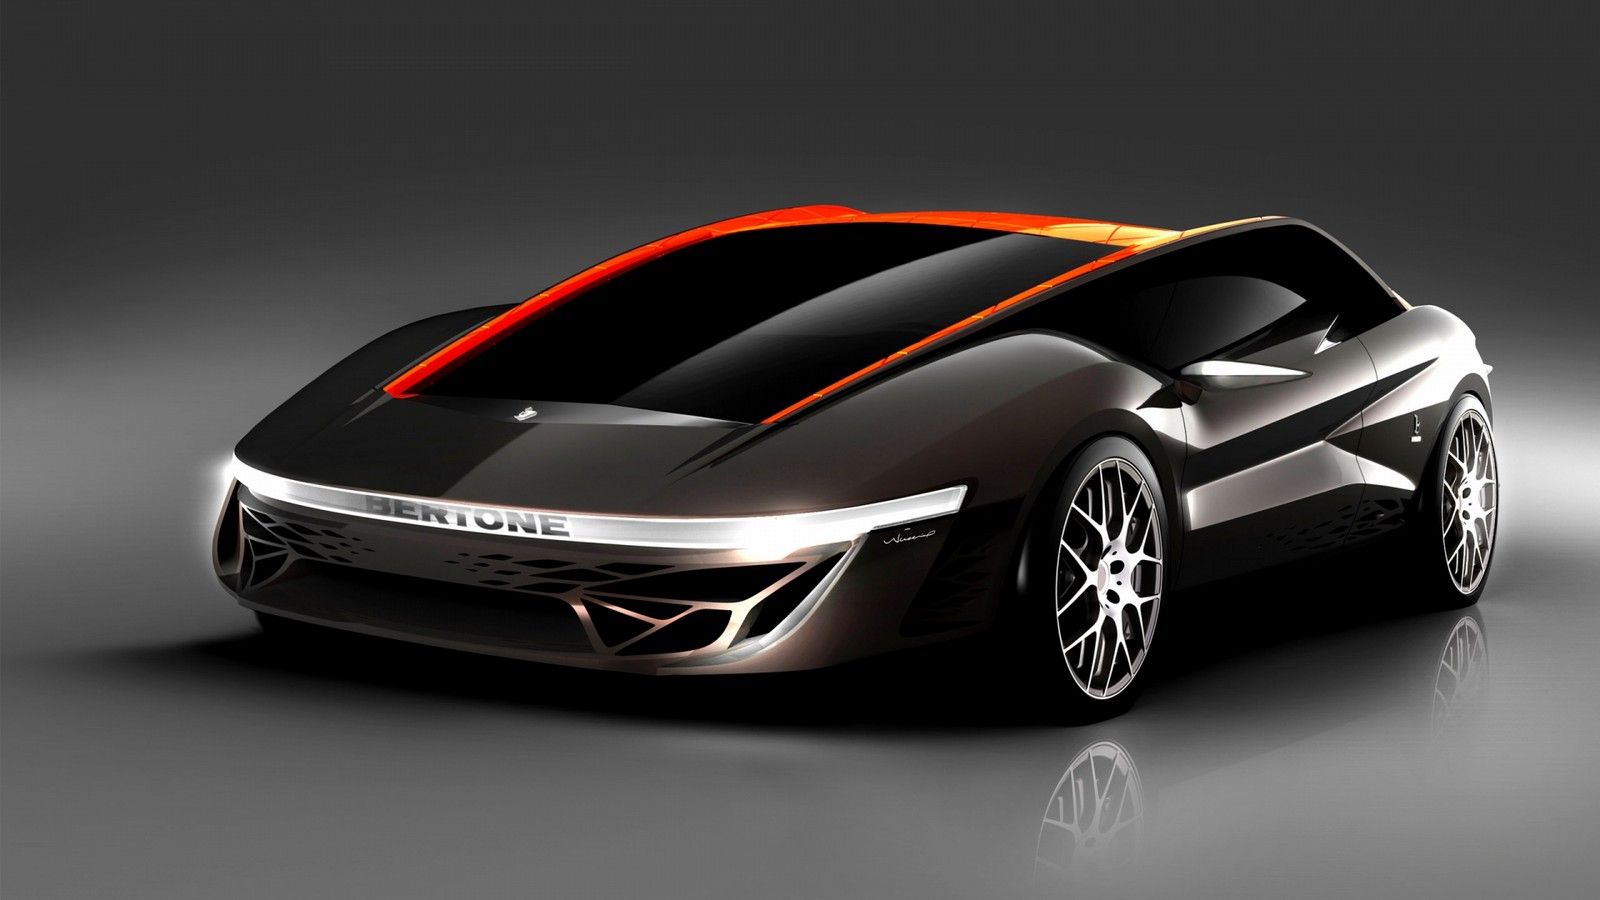 Bertone Dream Sports Car HD Wallpaper HD Wallpaper, High Quality Wallpaper For Your Laptop And Desktop Download For Free